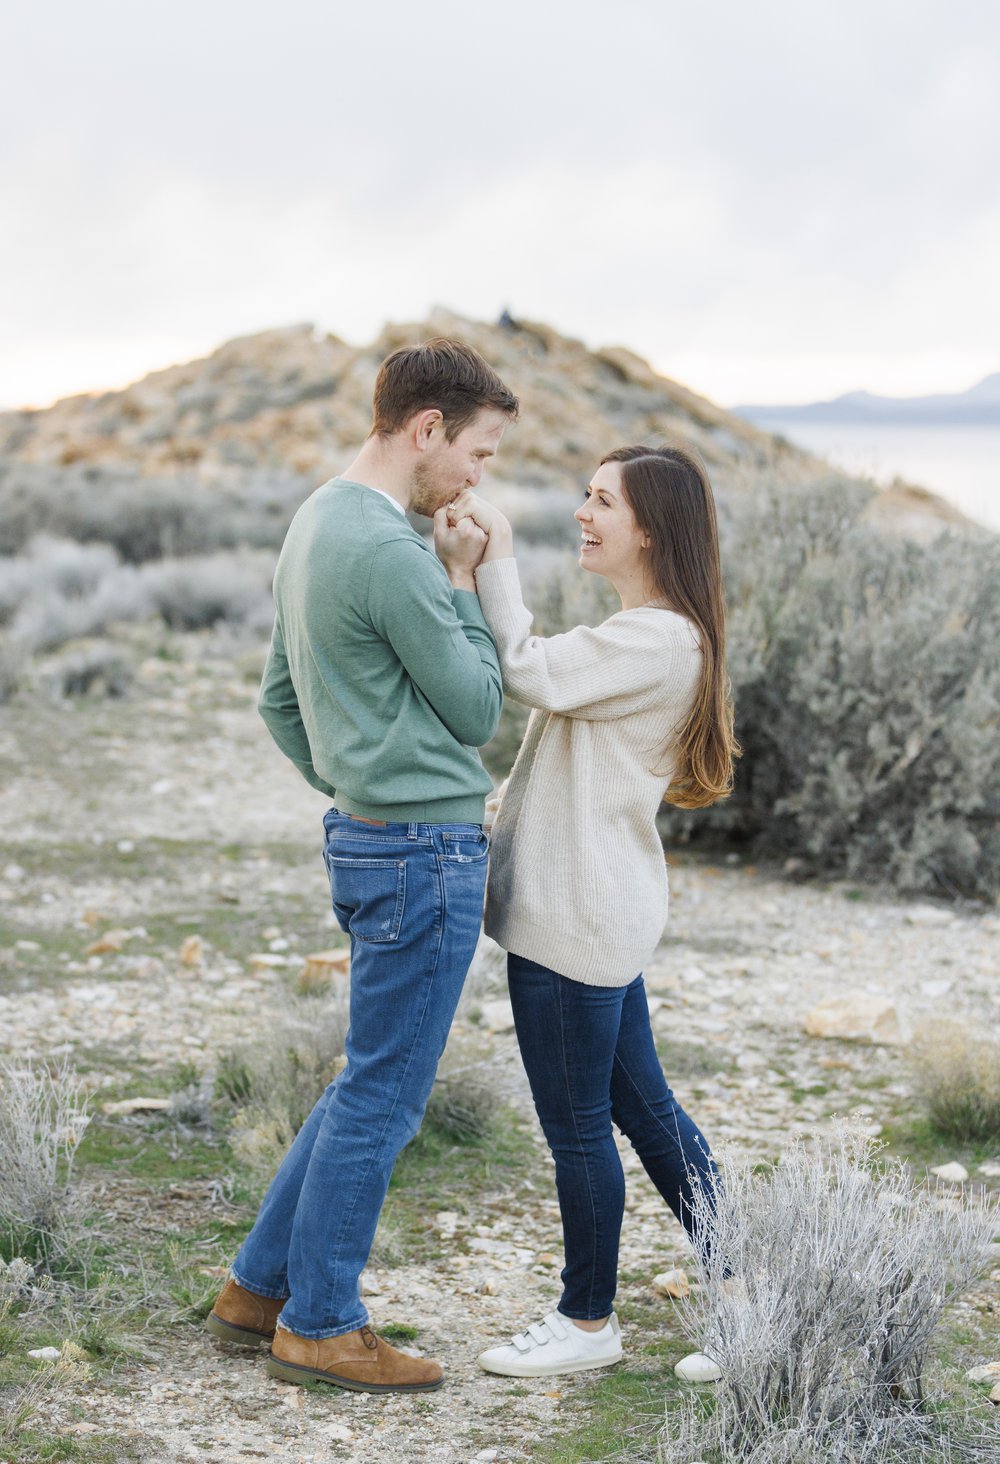  A man grabs his girlfriend's hand and kisses it on a mountain path in Utah by Savanna Richardson Photography. kissing her hand in love photography #SavannaRichardsonPhotography #SavannaRichardsonEngagements #UtahEngagements #AntelopeIsland #Springen